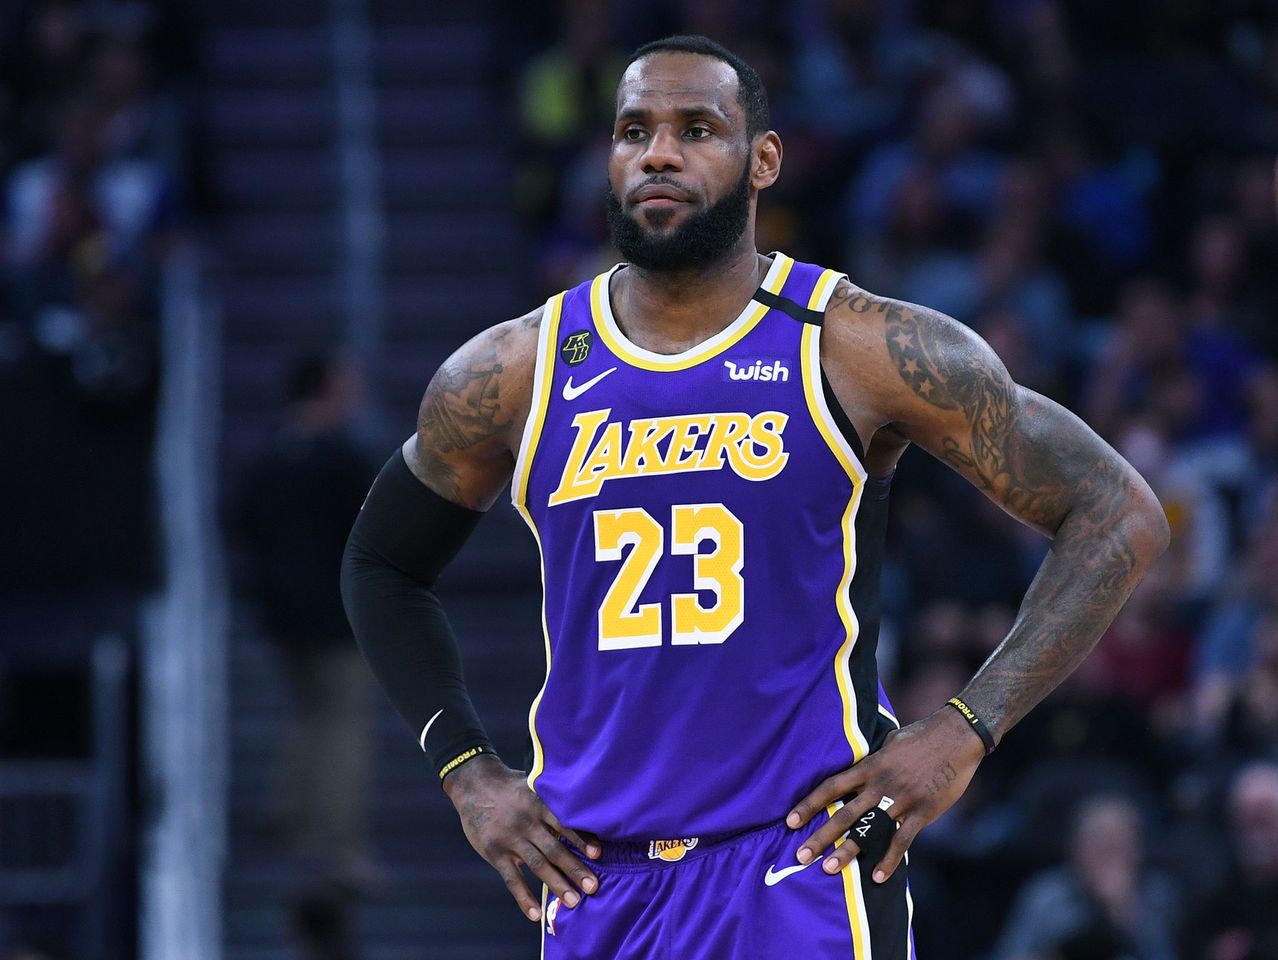 LeBron James #23 of the Los Angeles Lakers looks on against the Golden State Warriors during an NBA basketball game at Chase Center on February 08, 2020. | Photo: Getty Images